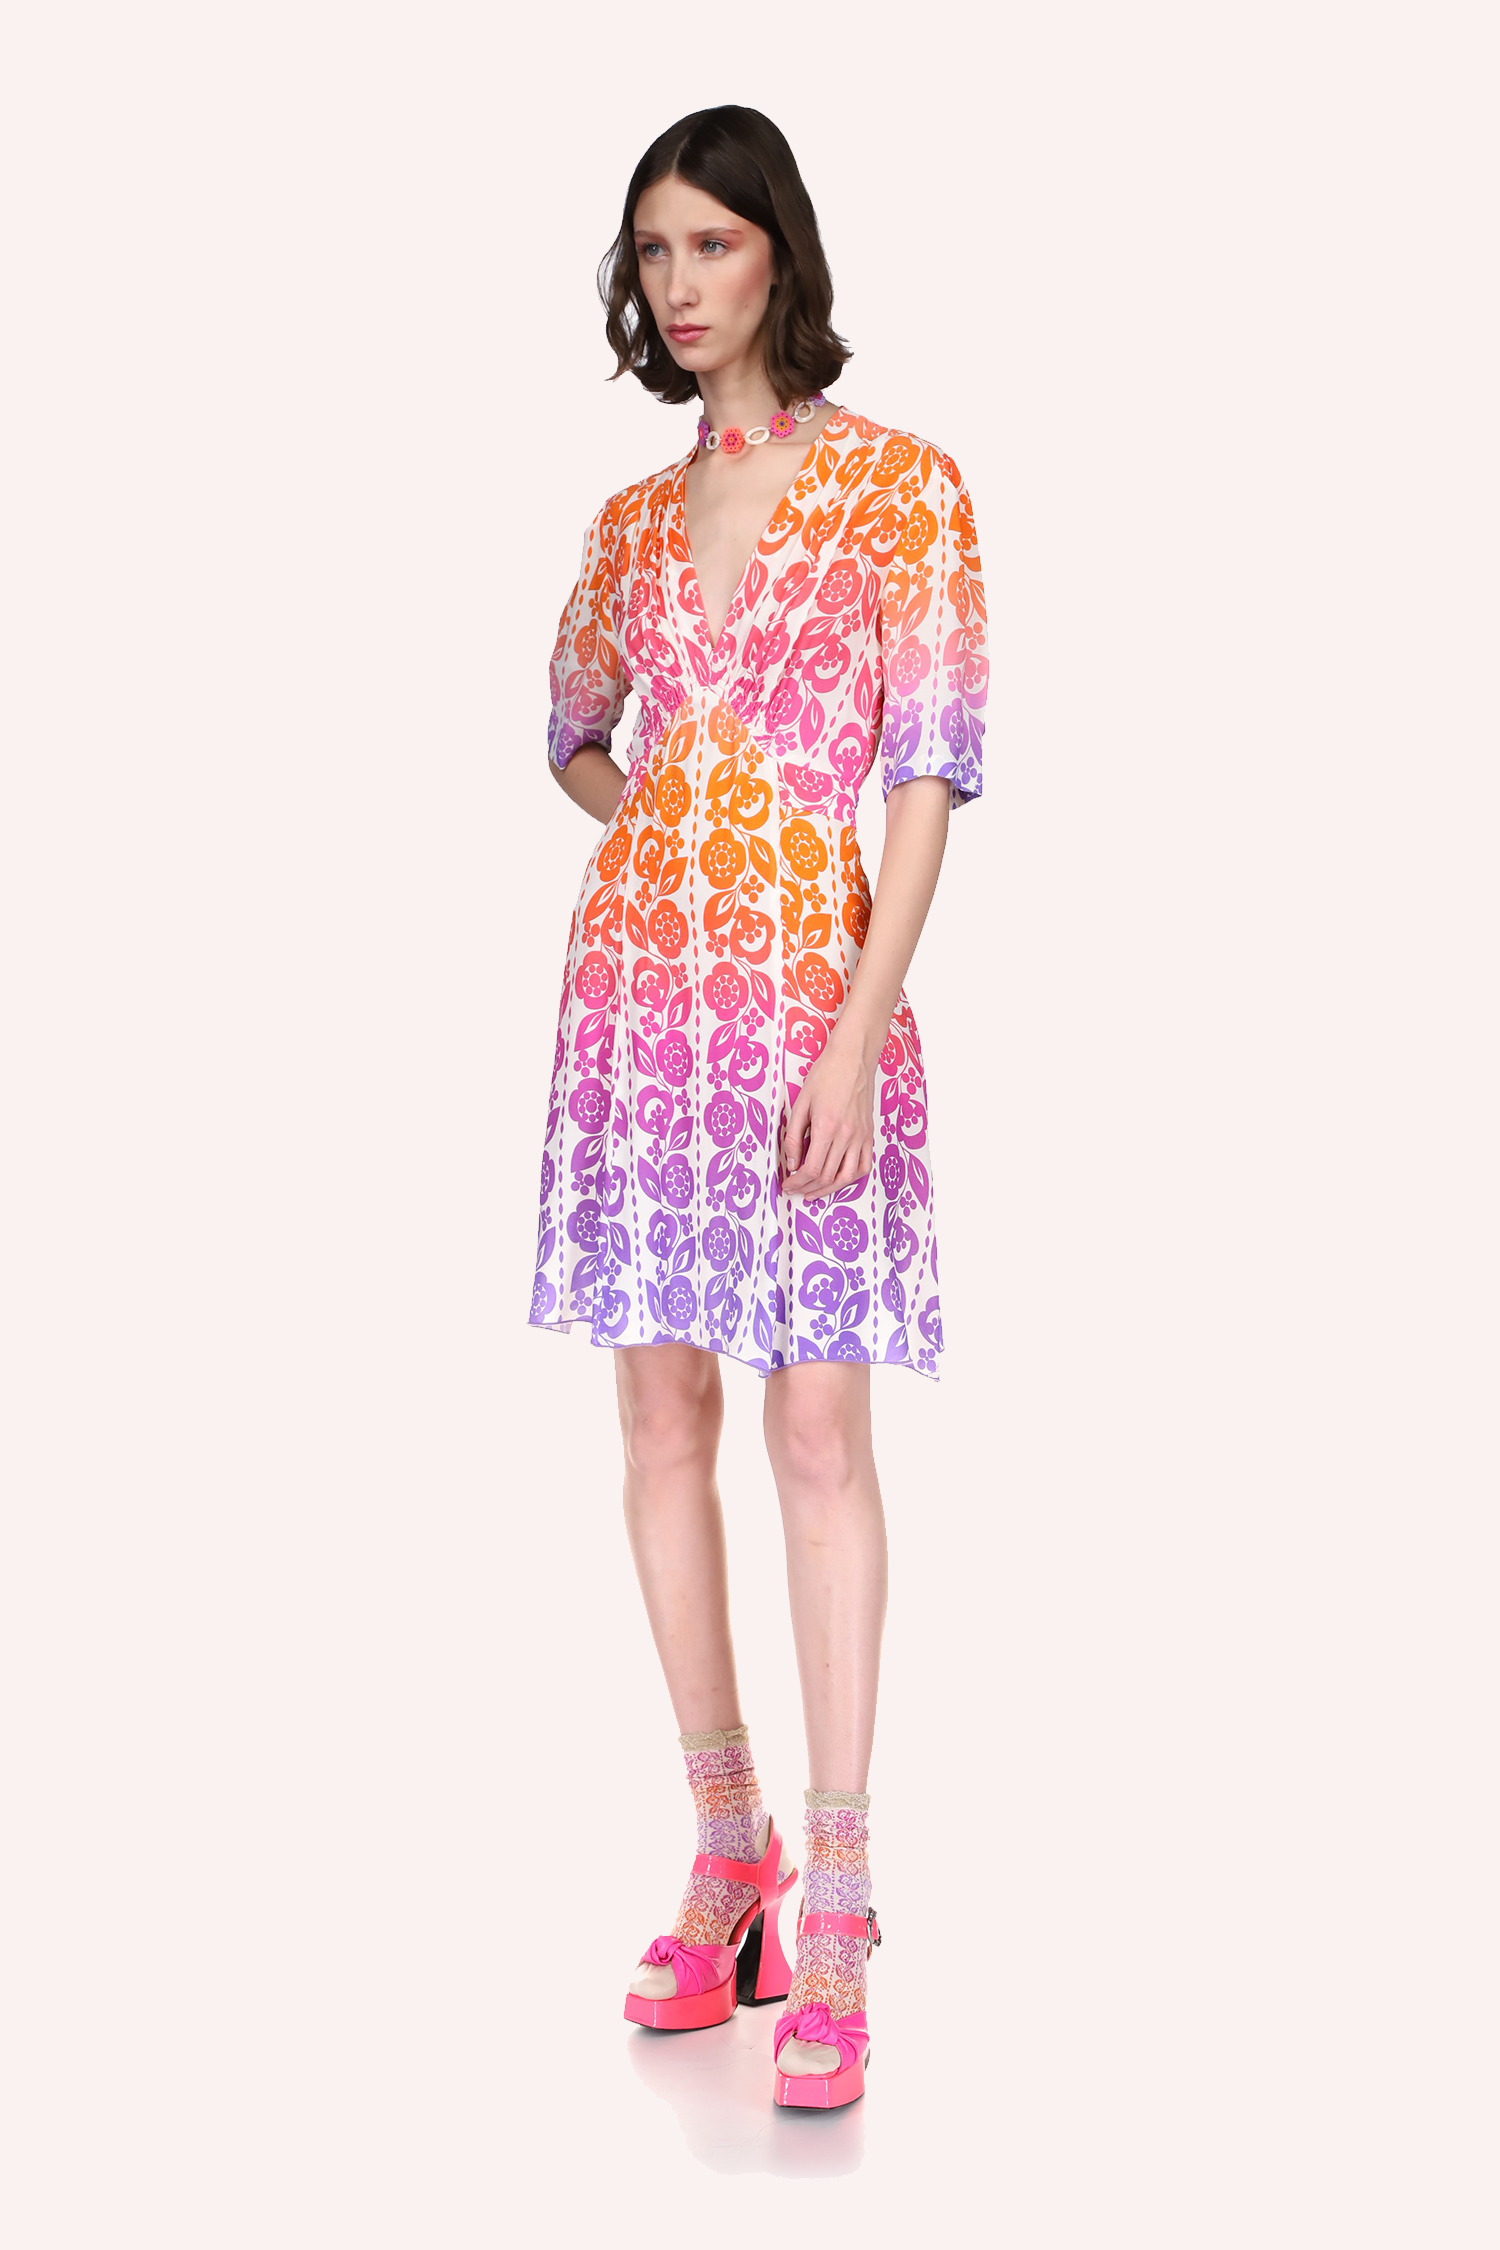 Radiant Ombre Dress - Anna Sui